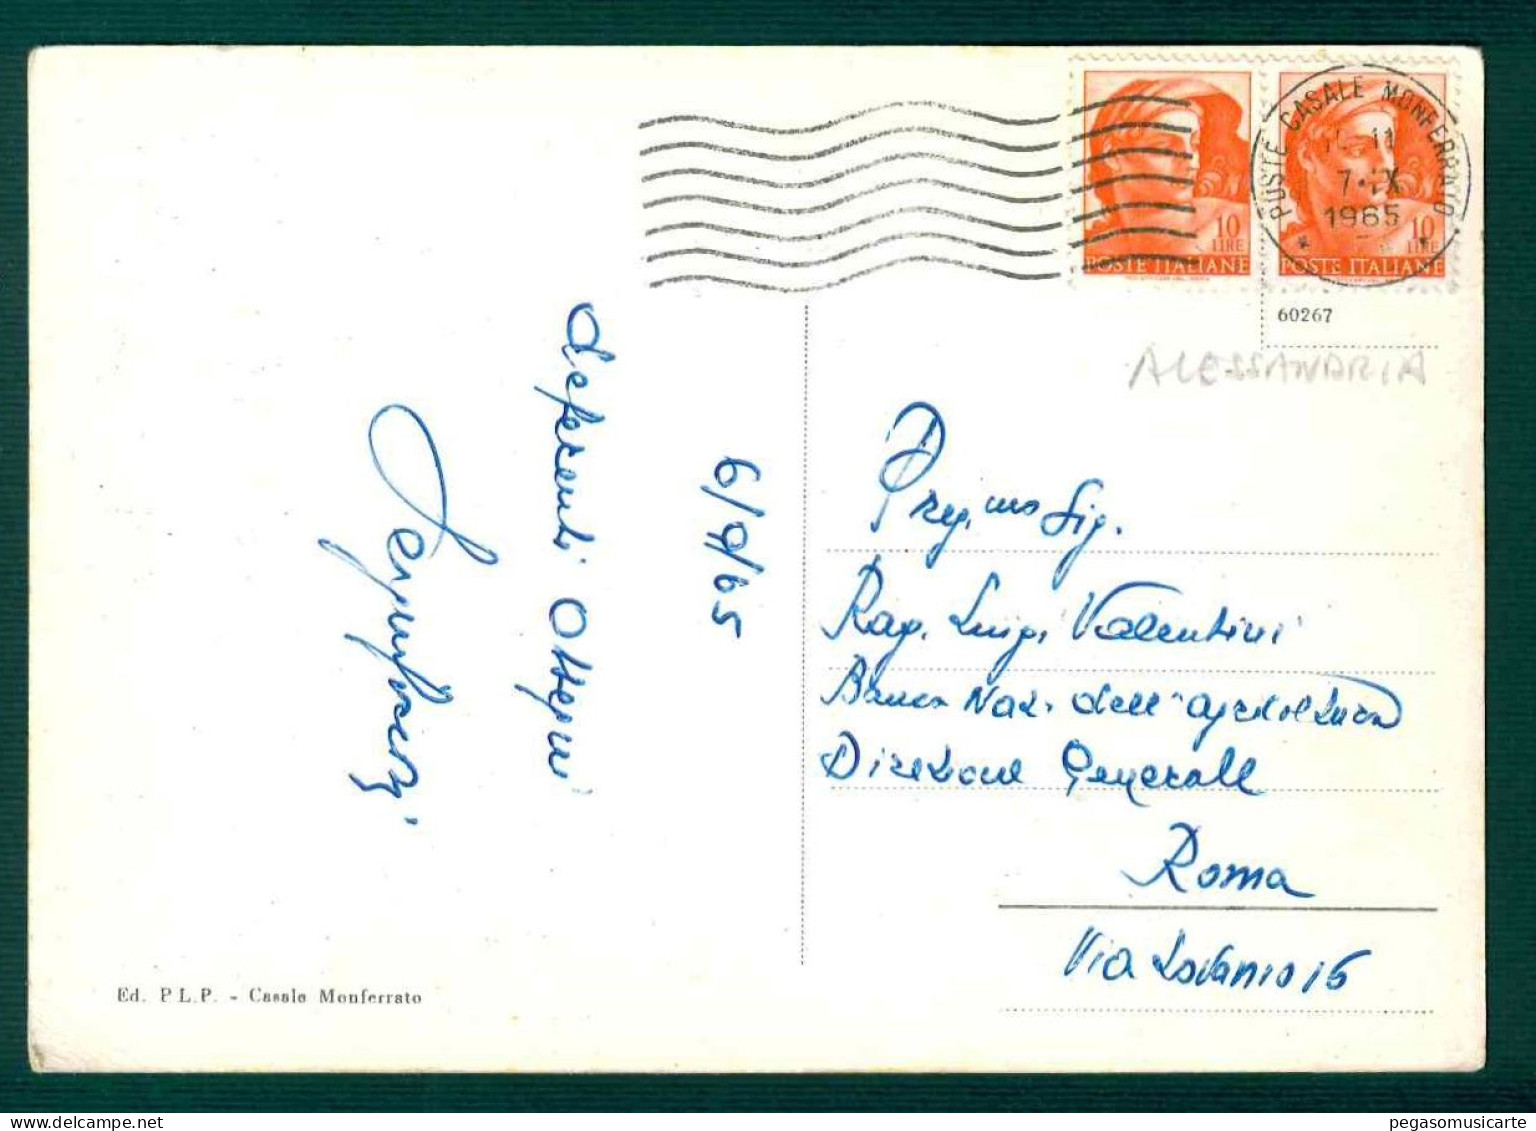 BF044 CERRINA VALLE - PANORAMA - ALESSANDRIA - 1965 - Other & Unclassified